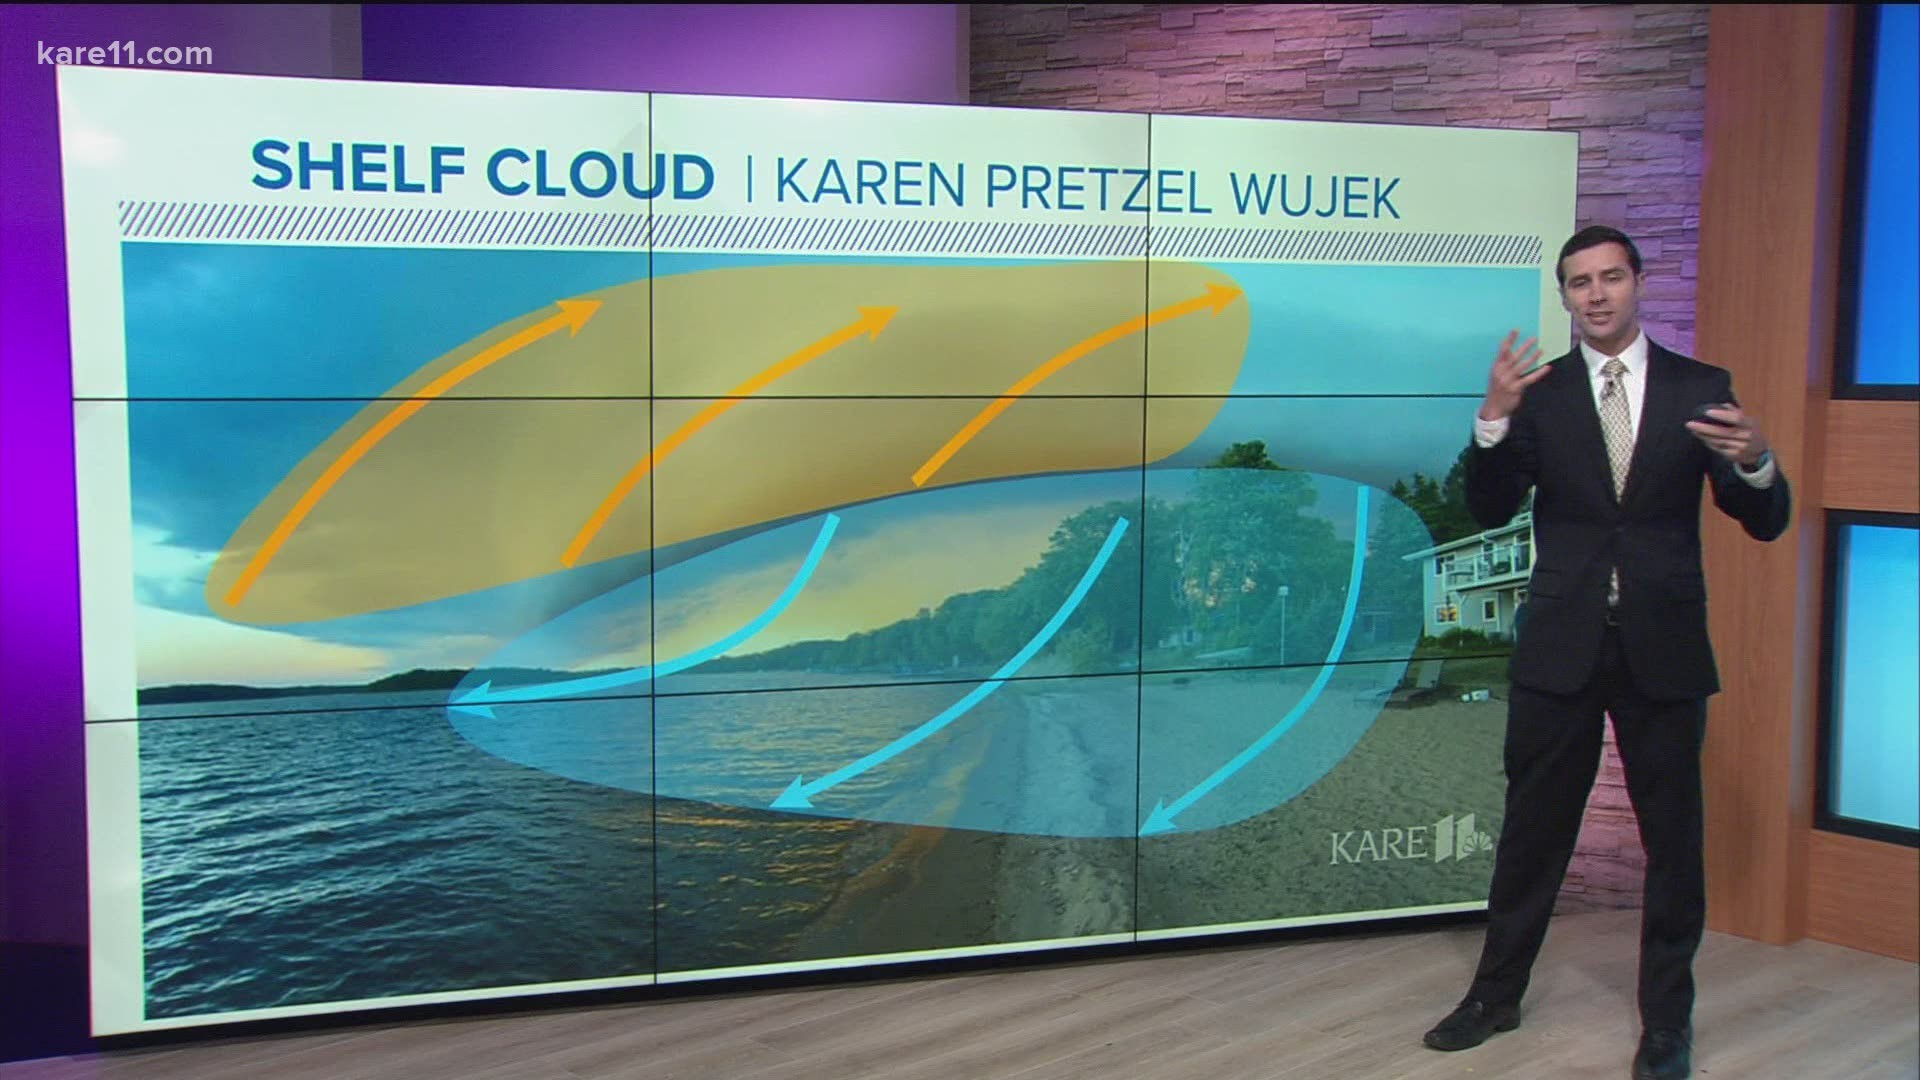 KARE 11 meteorologist Ben Dery explains how shelf clouds form and how they're different than wall clouds.